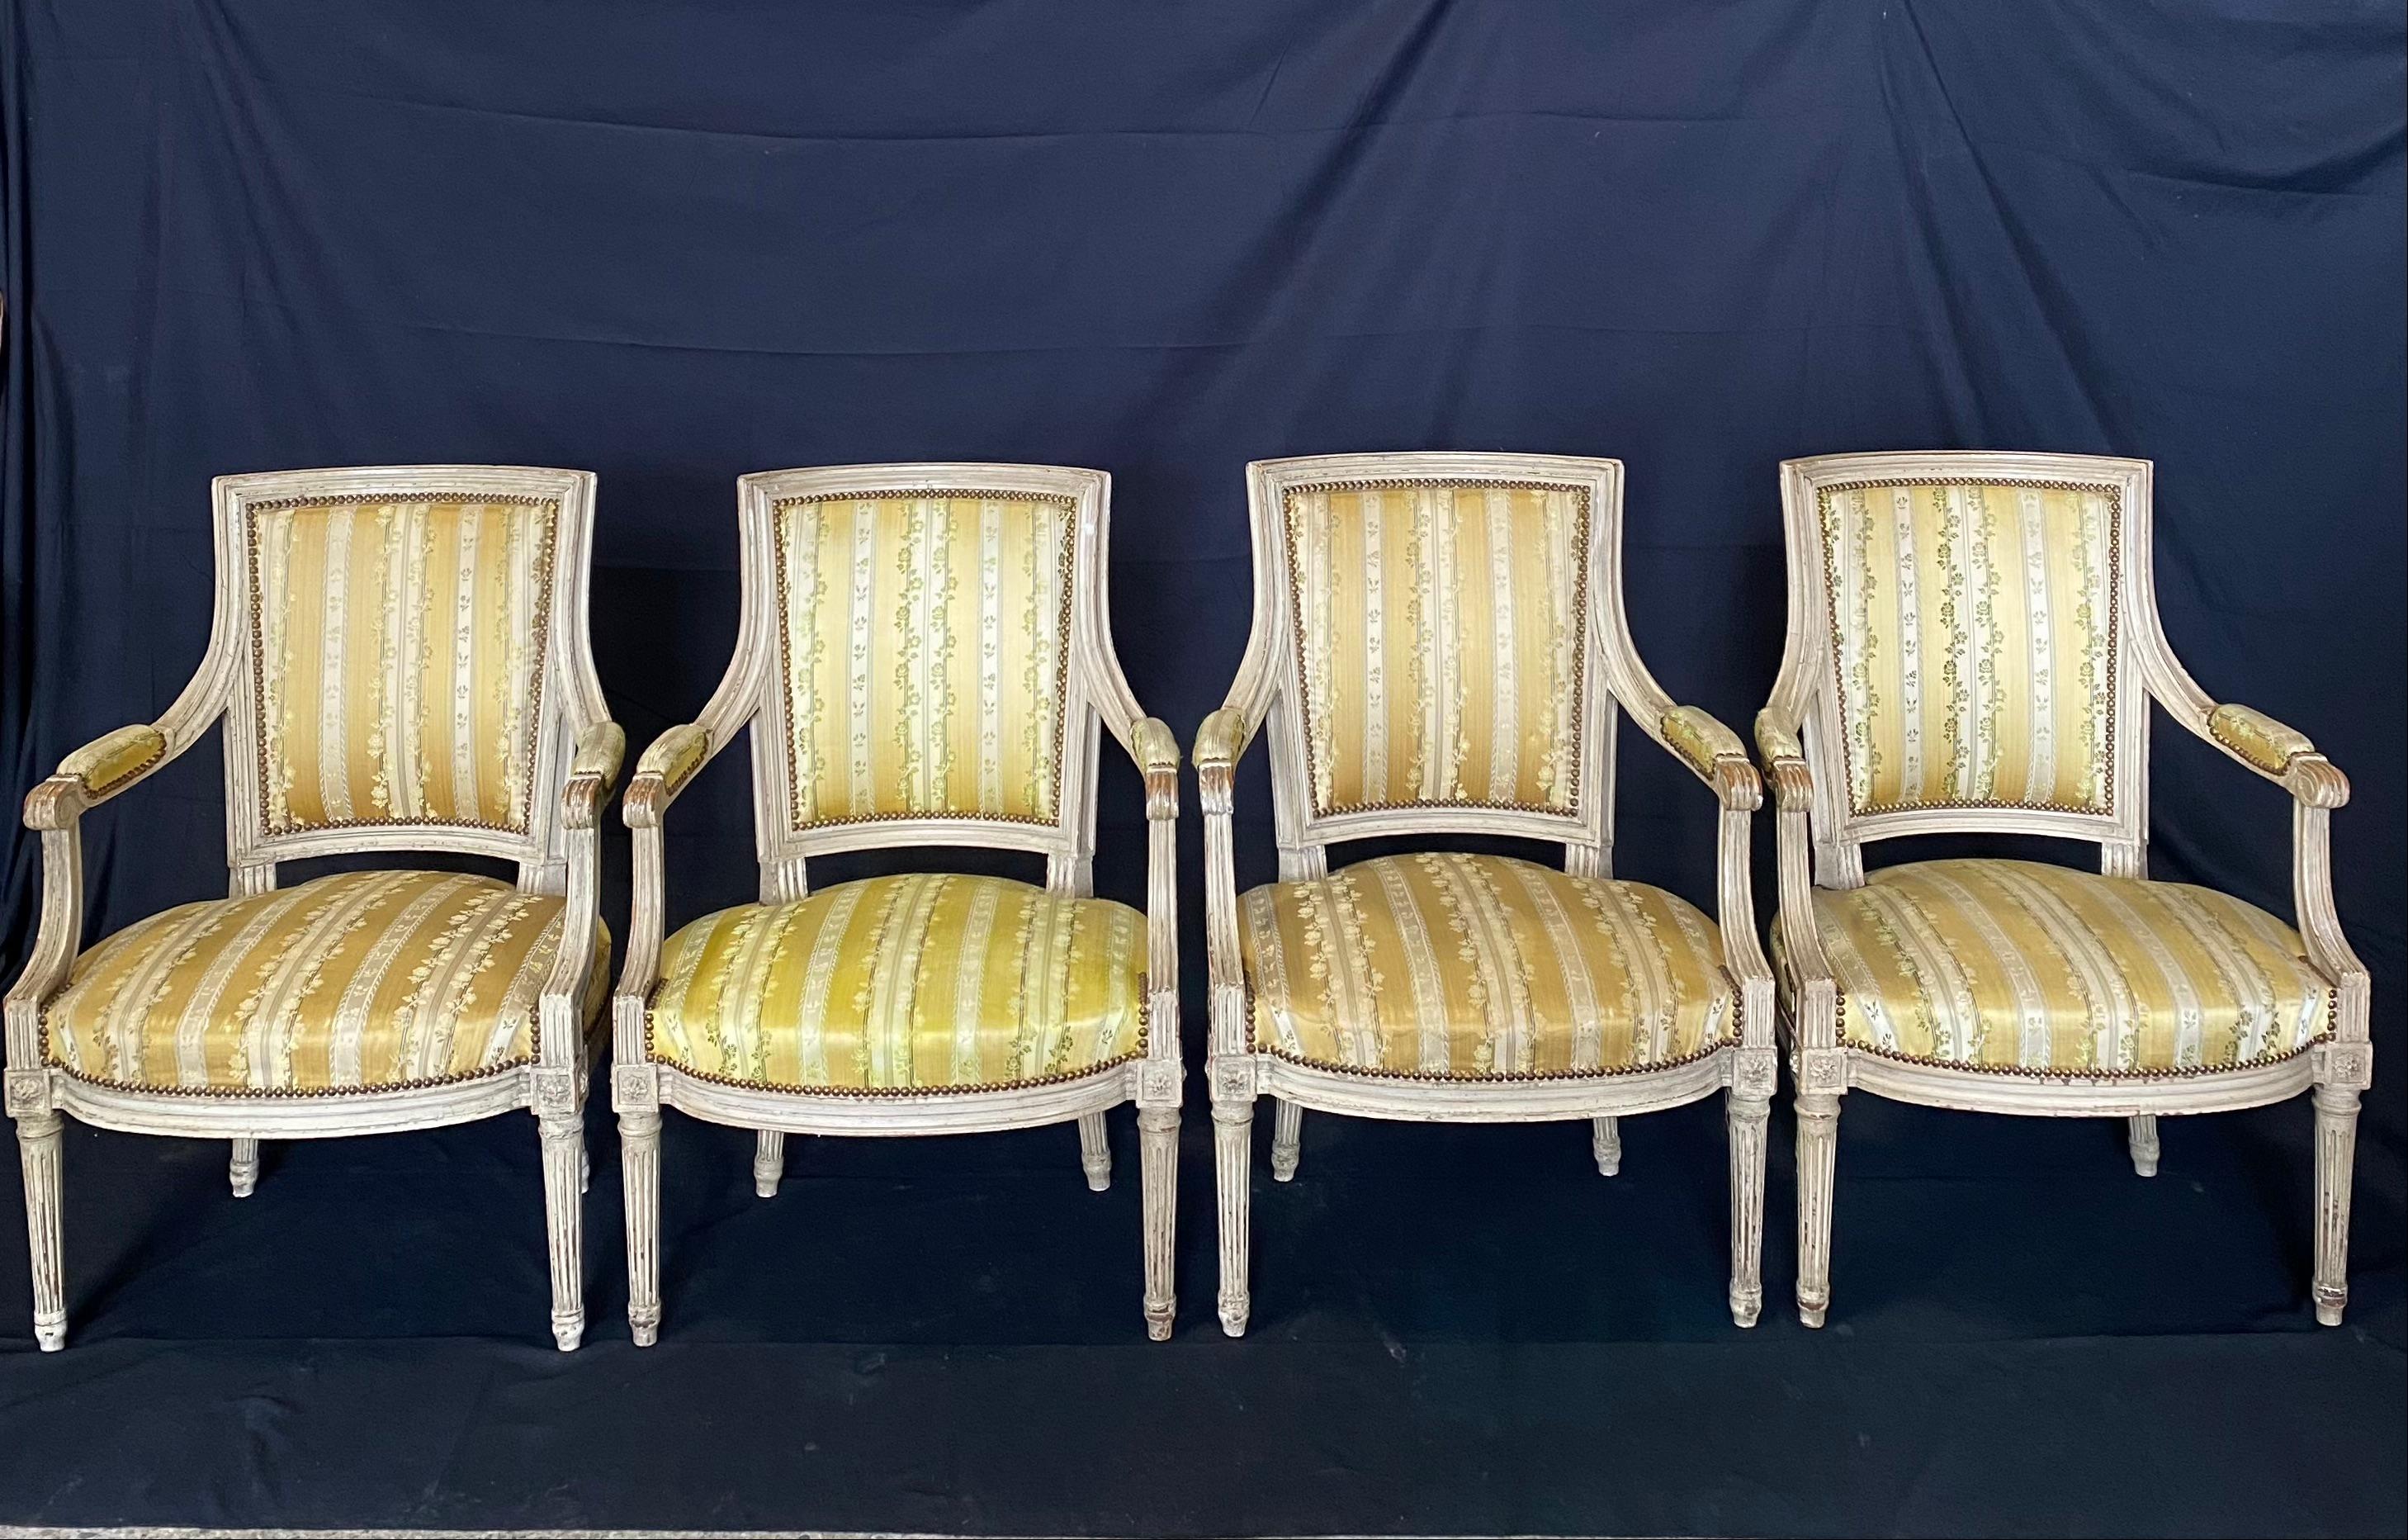 19th century painted Louis XVI armchairs with tapered fluted legs, bow front seats, square upholstered padded back, and upholstered arms, all in classic French gold striped fabric. Fabric is in good shape and probably original to the chairs. One of